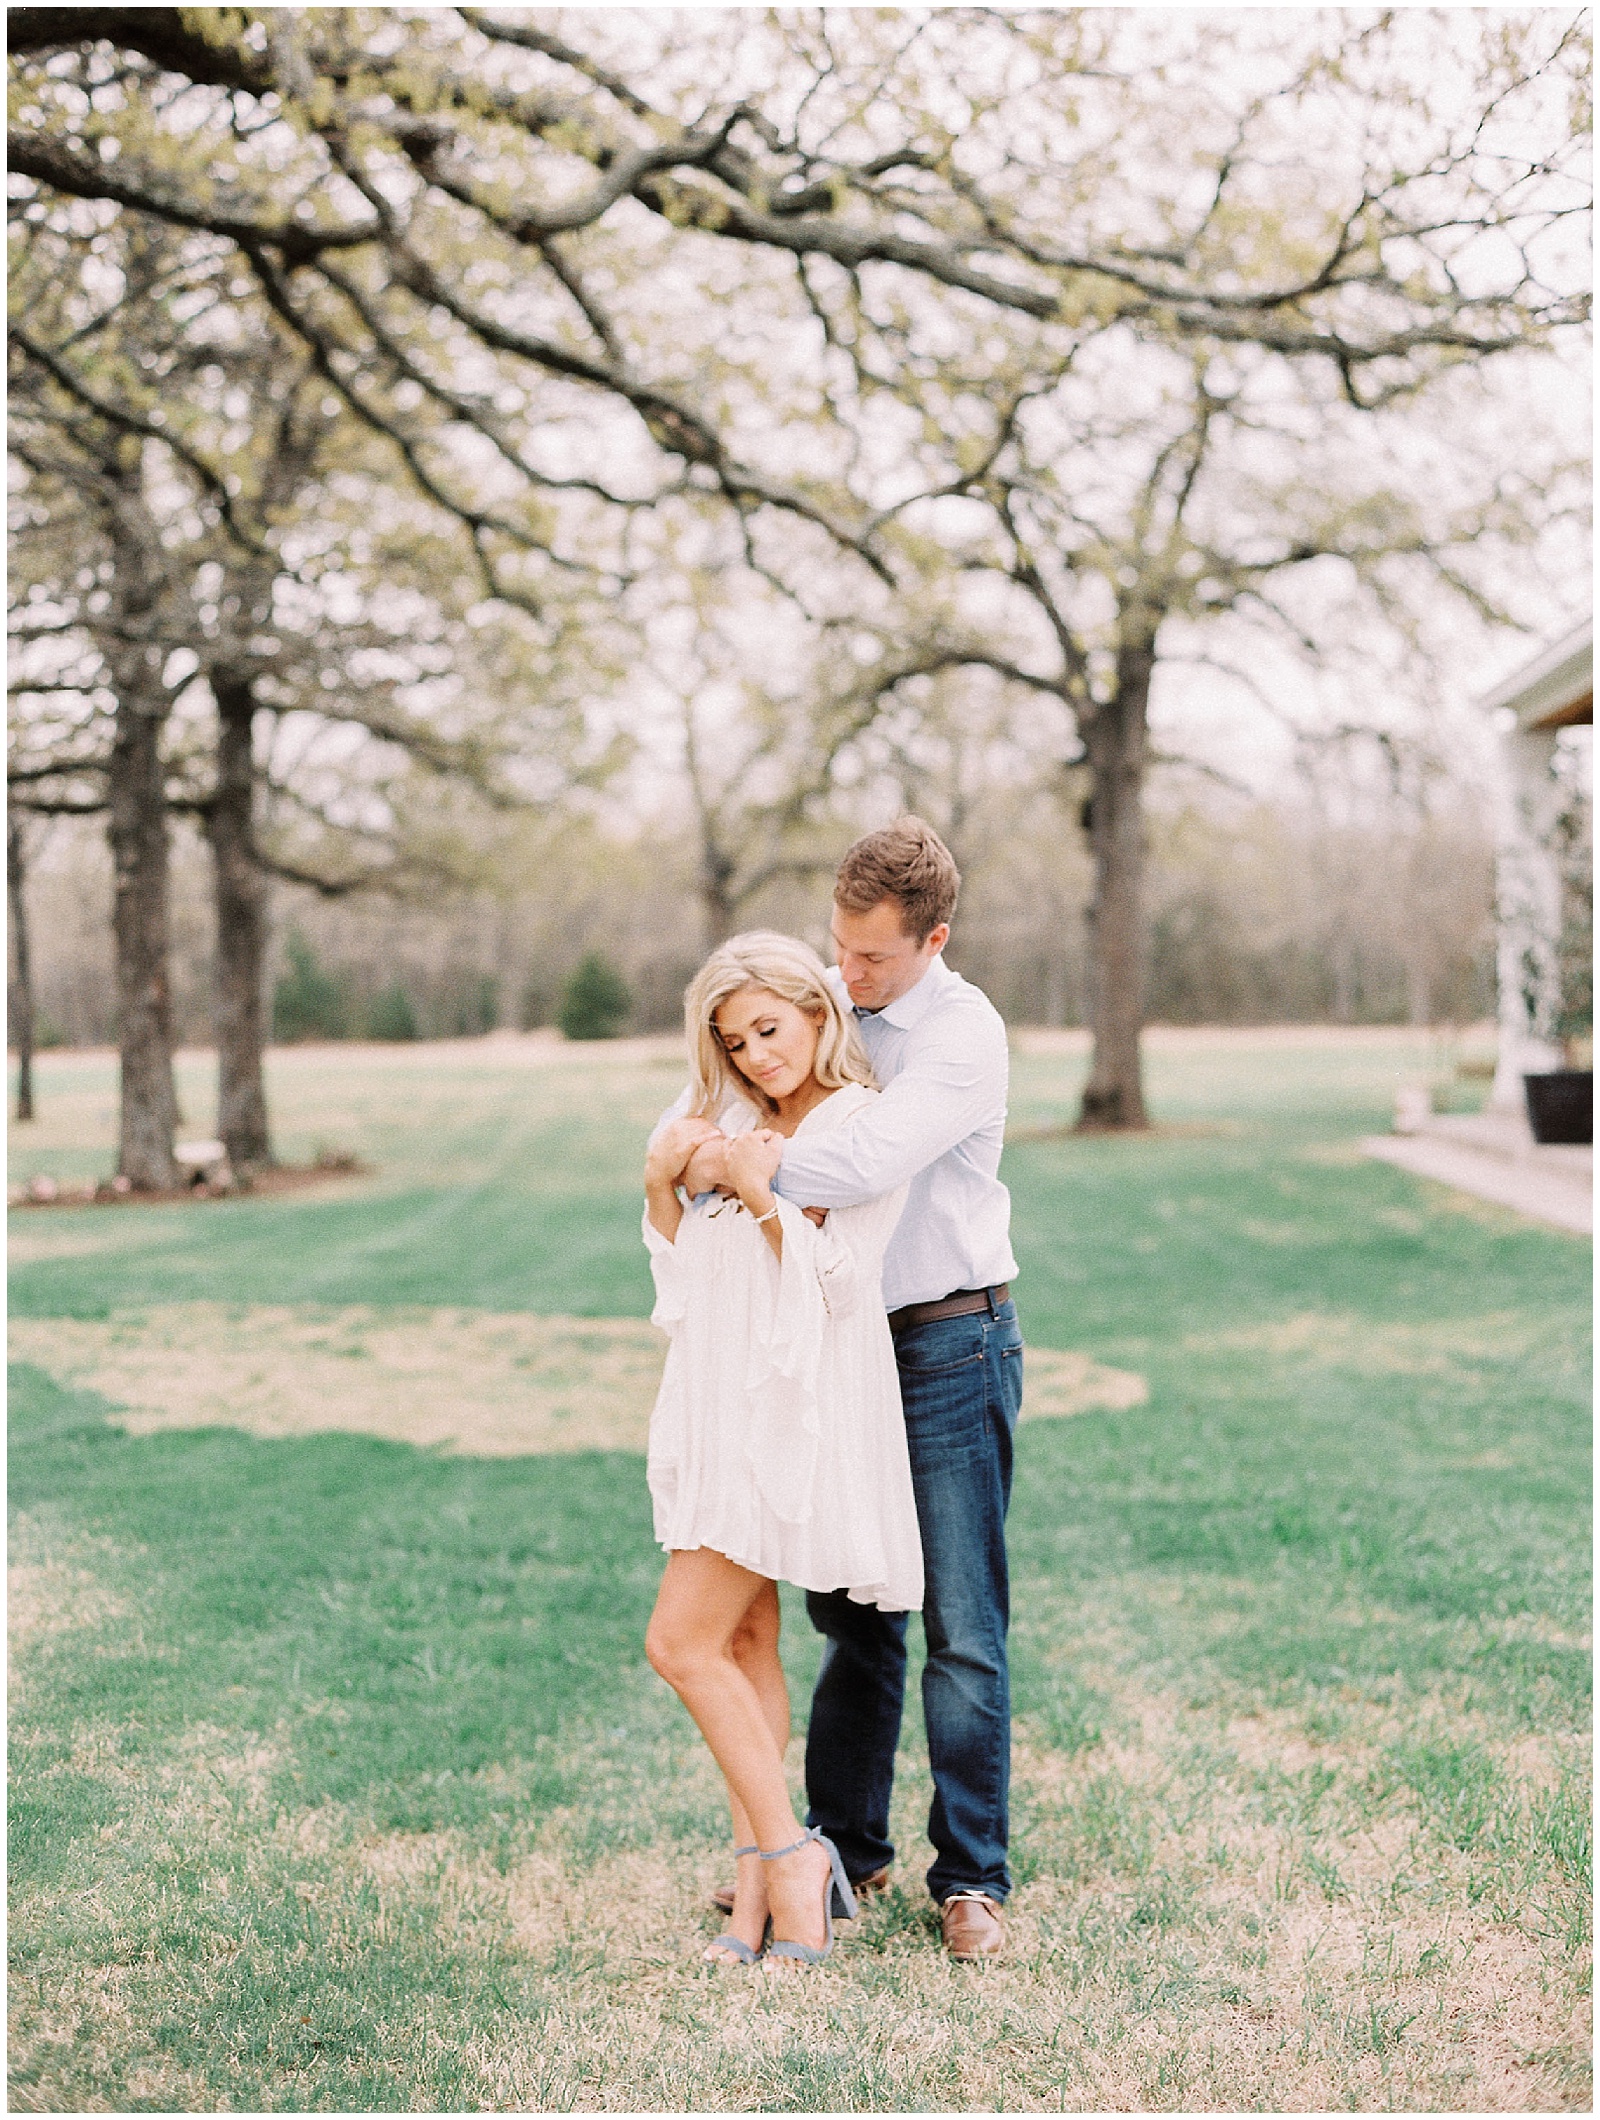 White Sparrow Barn Engagement Session